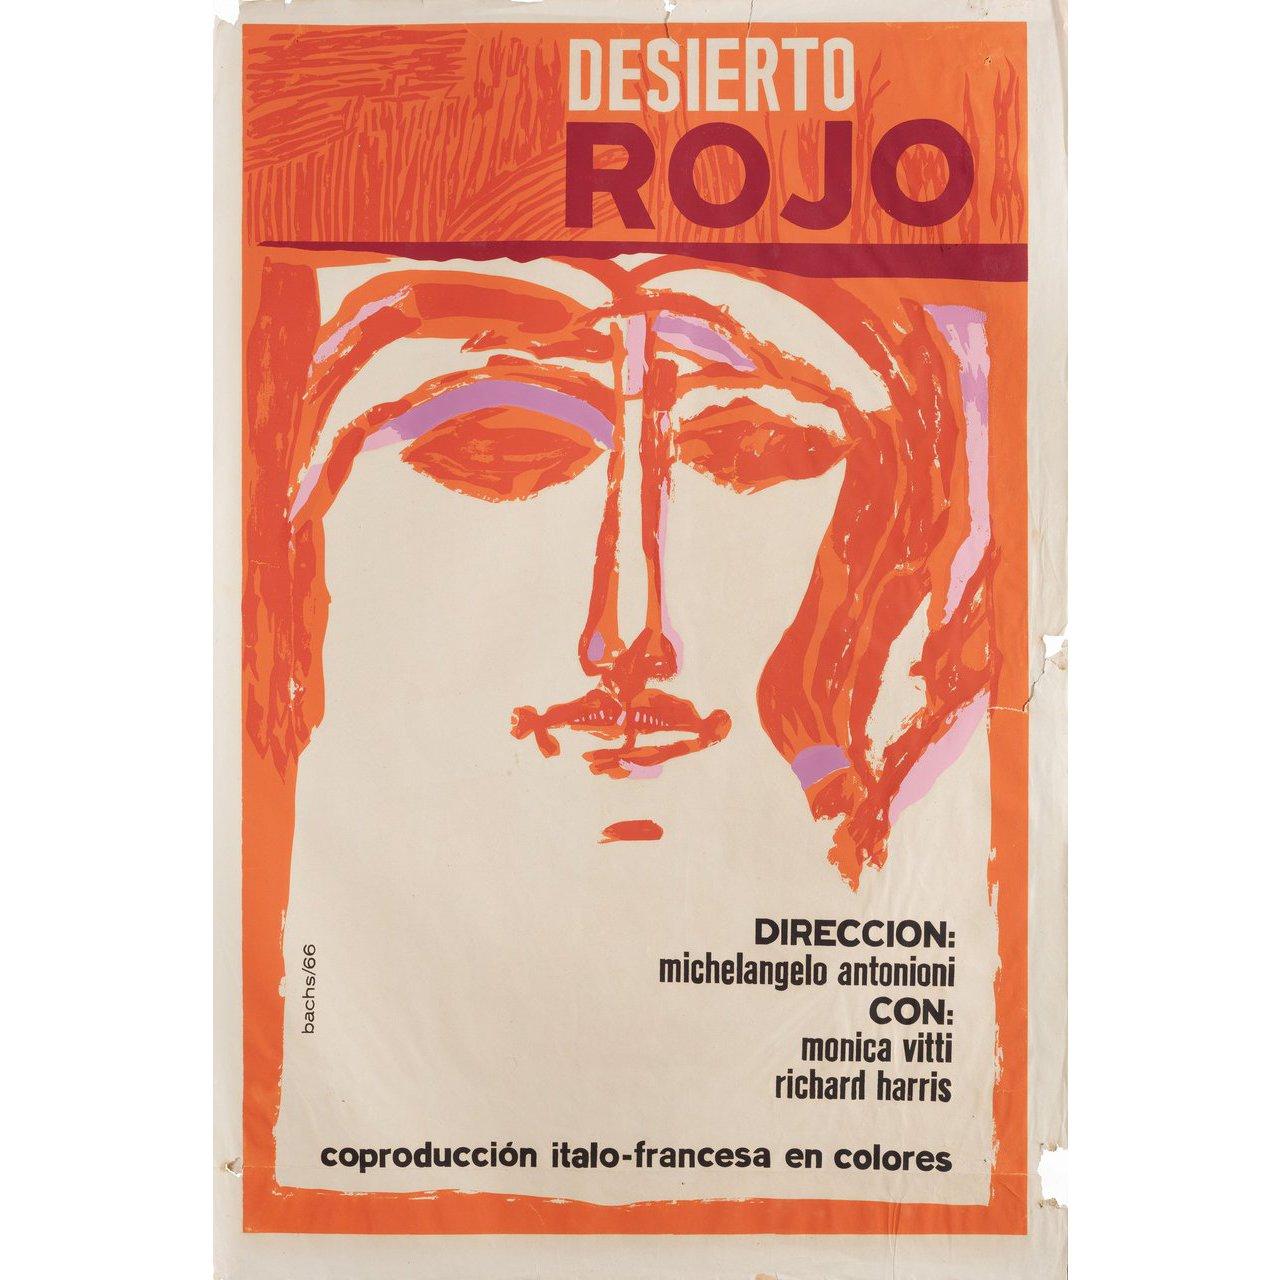 Original 1966 Cuban poster by Eduardo Munoz Bachs for the first Cuban theatrical release of the film Red Desert (Il deserto rosso) directed by Michelangelo Antonioni with Monica Vitti / Richard Harris / Carlo Chionetti / Xenia Valderi. Good-Very